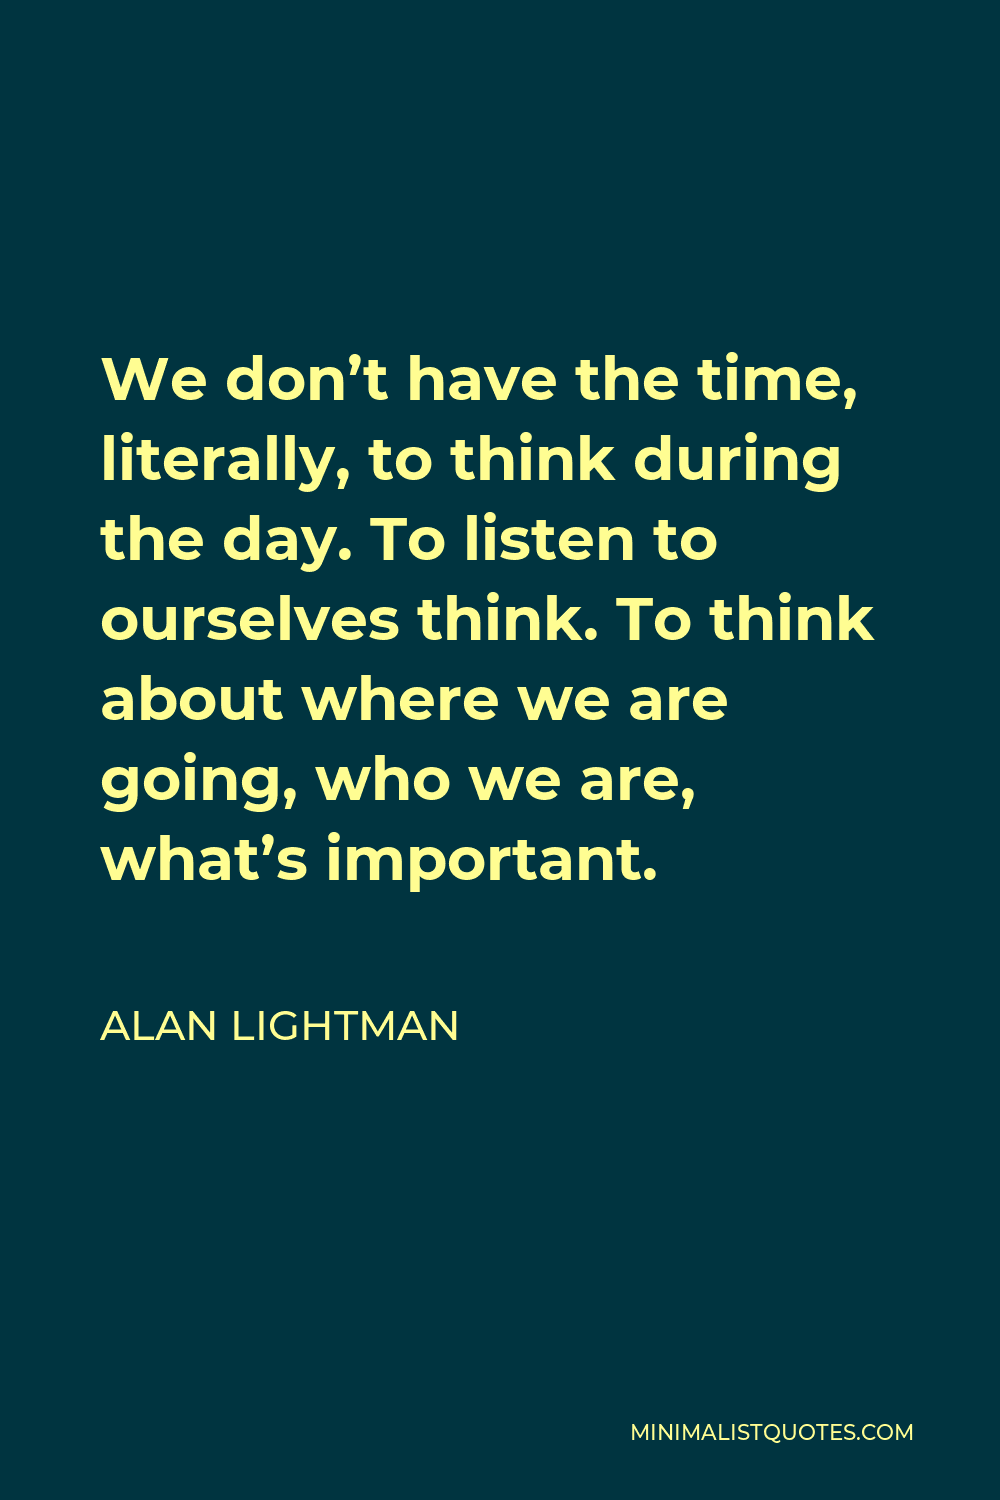 Alan Lightman Quote - We don’t have the time, literally, to think during the day. To listen to ourselves think. To think about where we are going, who we are, what’s important.